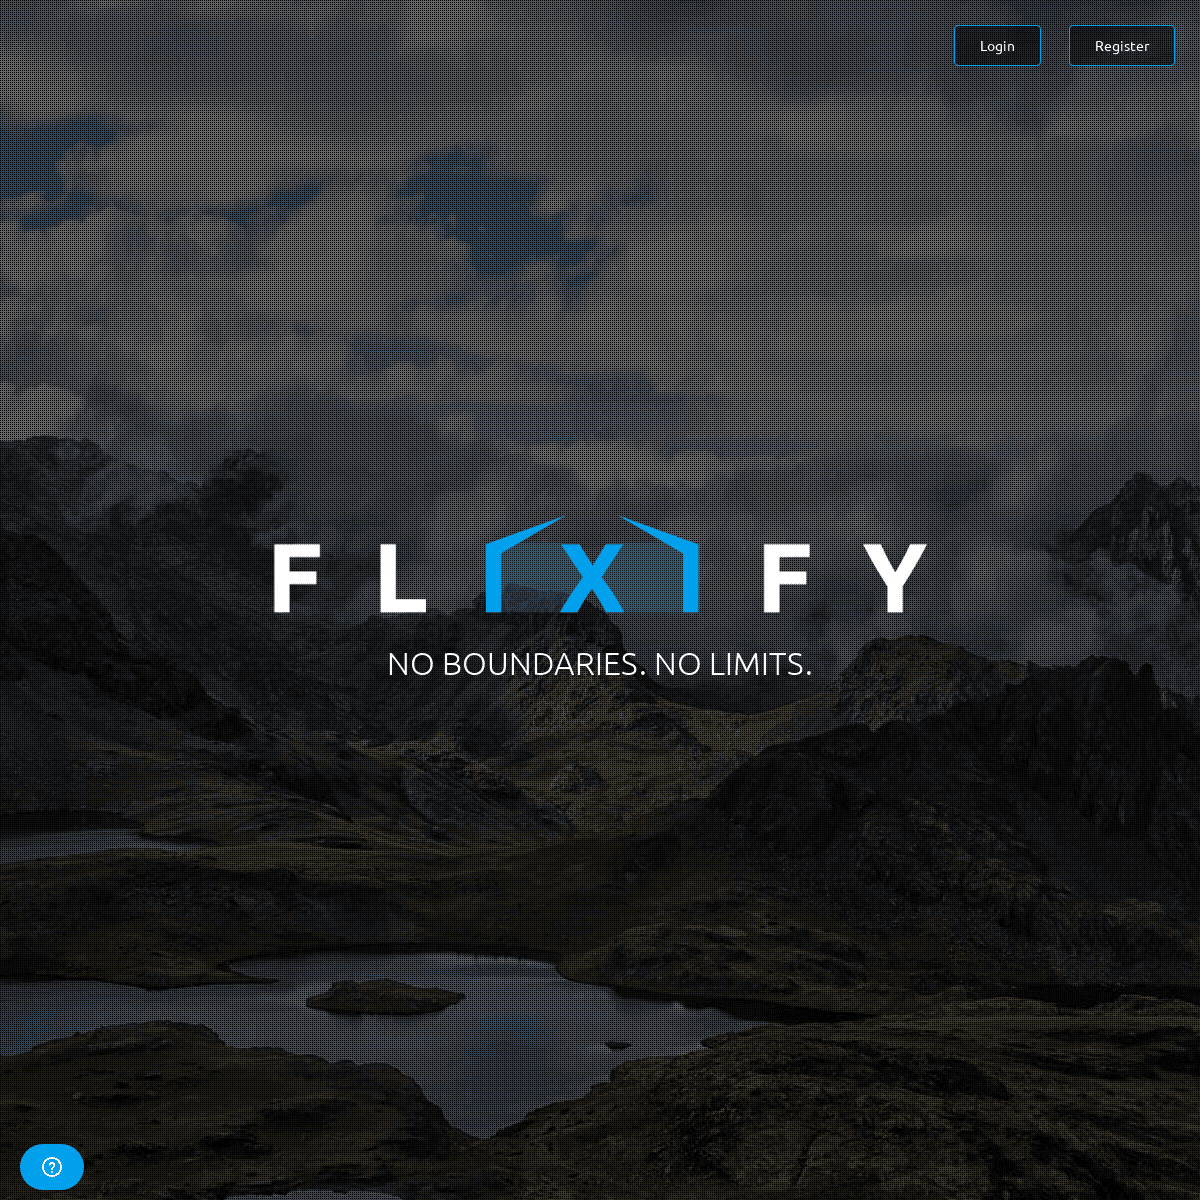 A complete backup of flixify.com